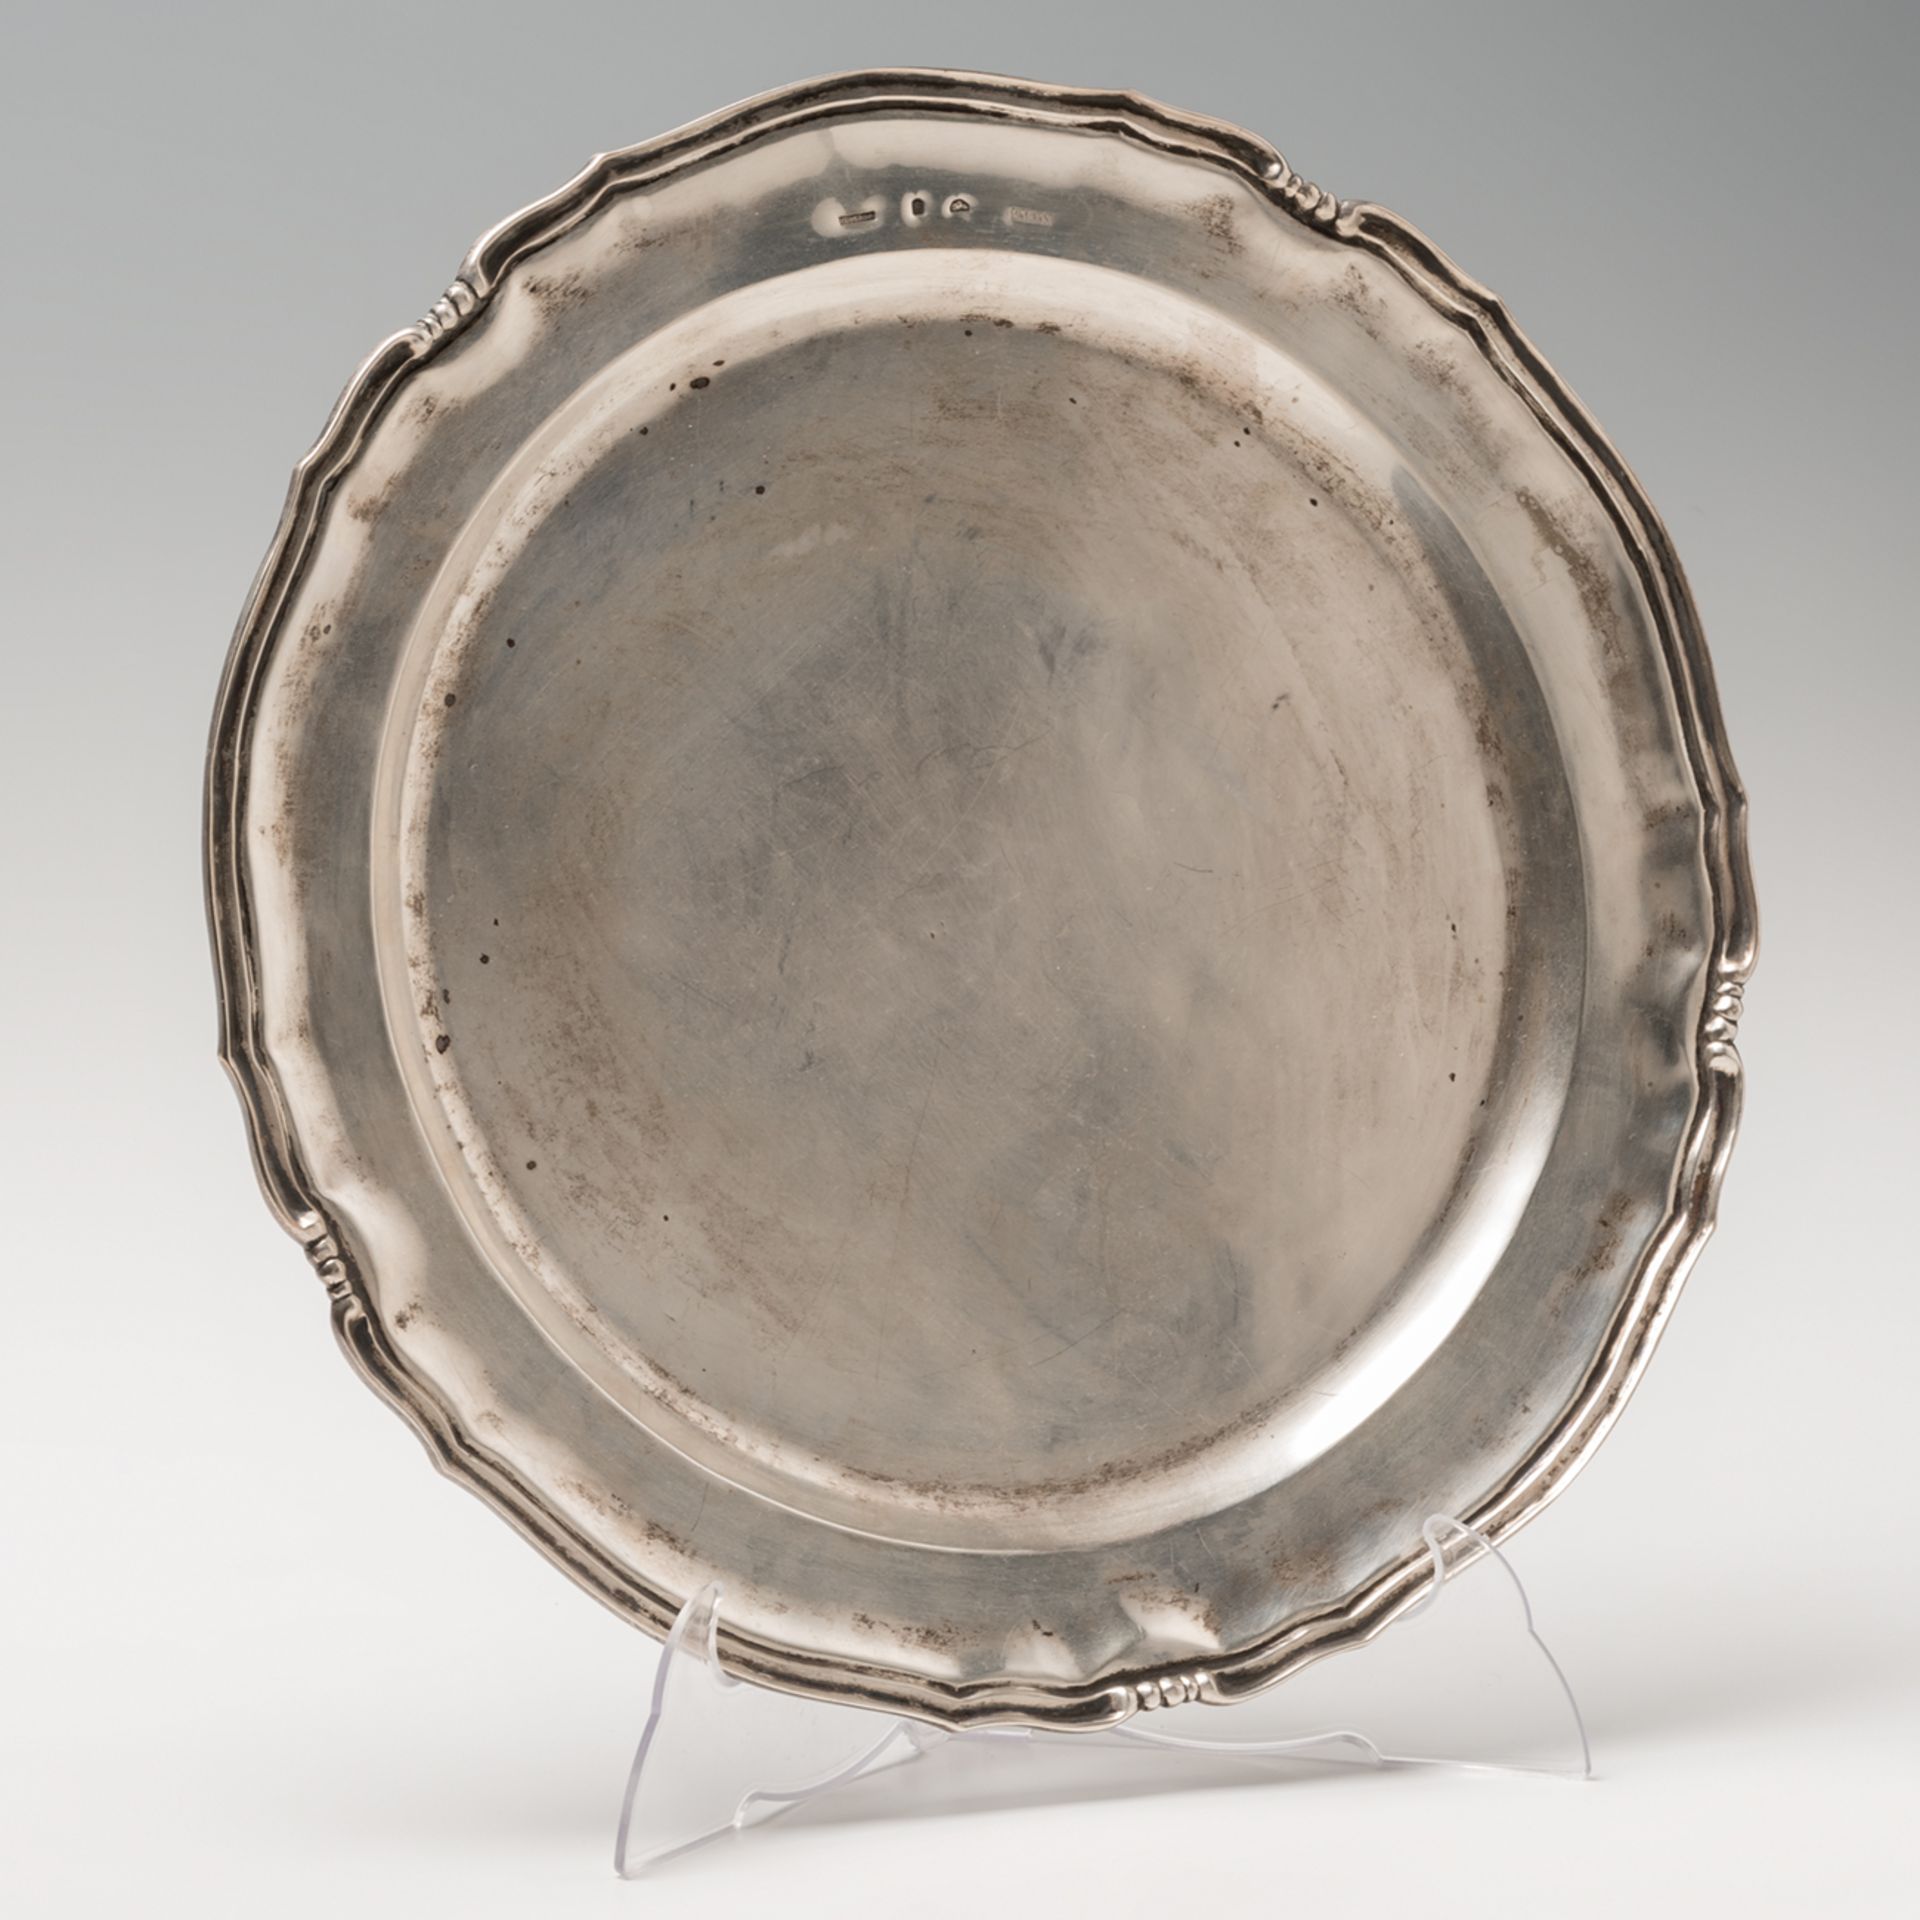 Under plate, trivet, in stamped silver. Mexico. S. XIXWeight: 744.5 g. Measure: 33 cm in diameter.